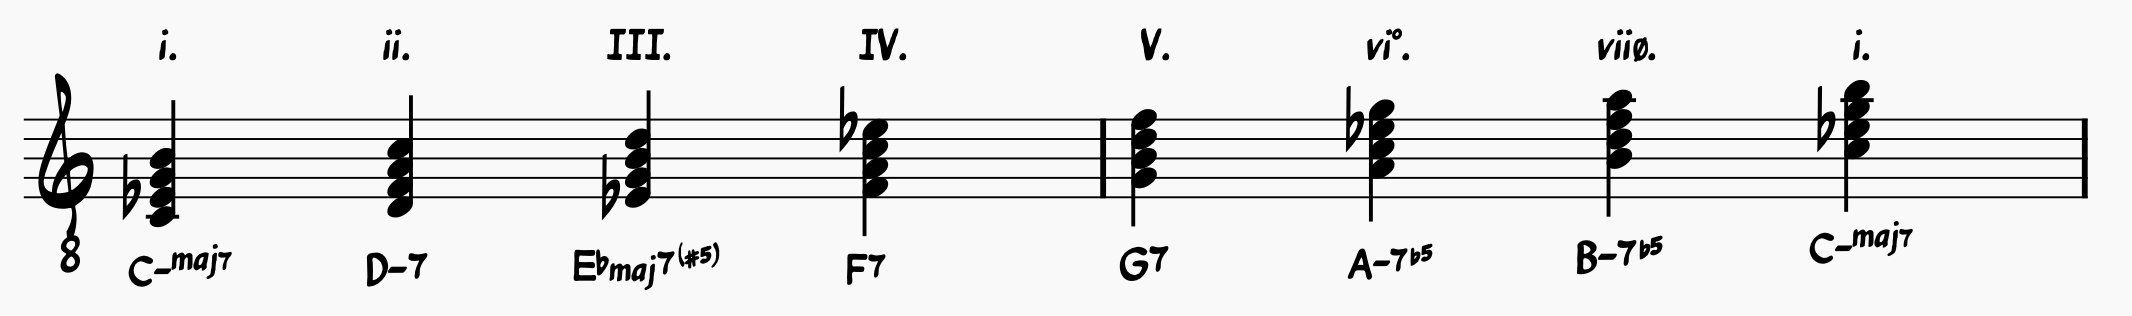 C melodic minor harmonized in seventh chords